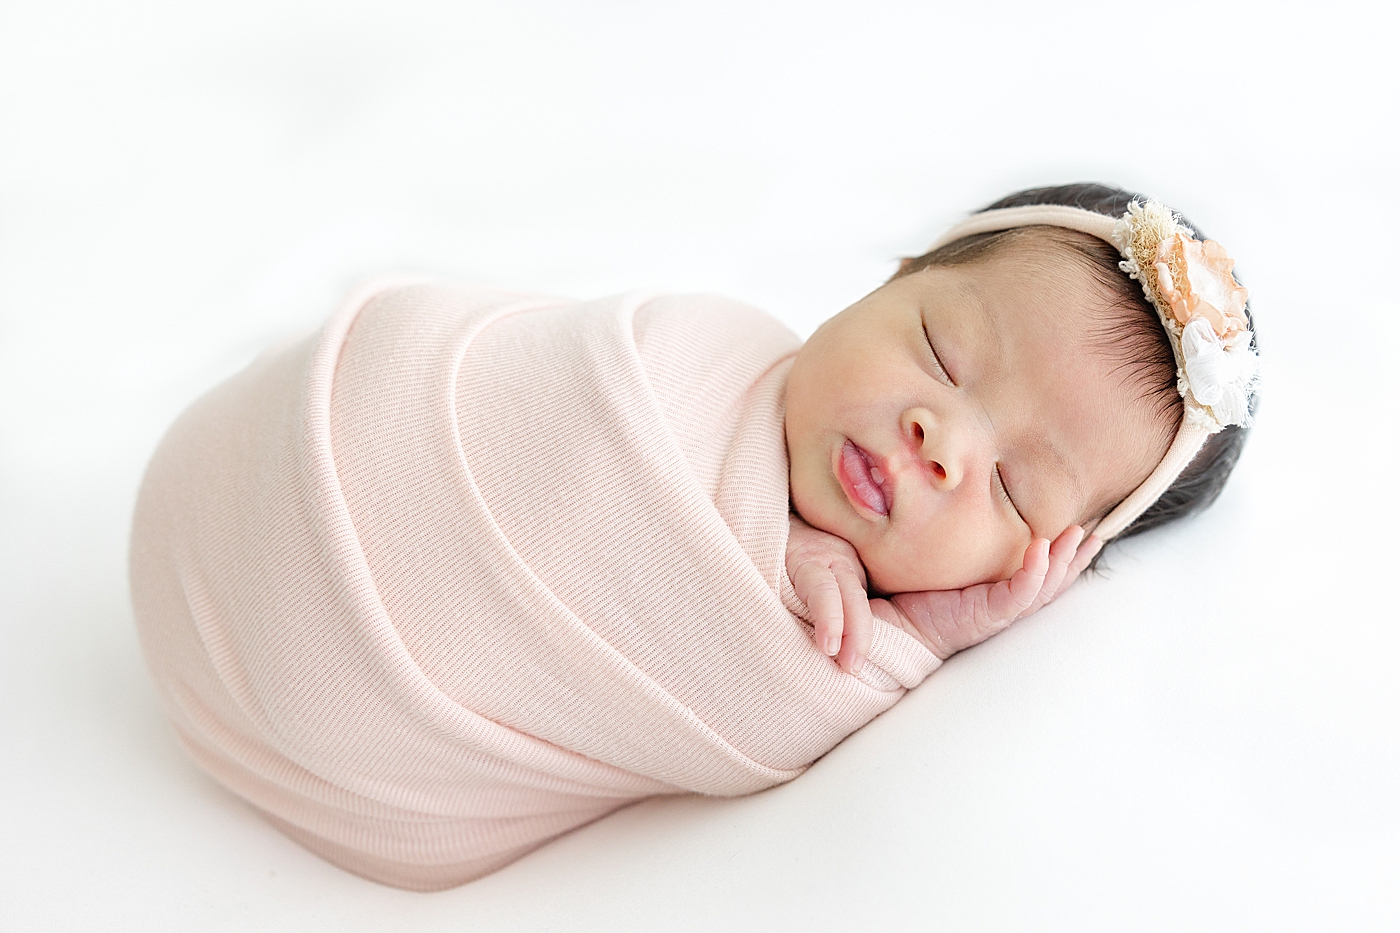 Newborn baby girl wrapped in pink swaddle | Image by Sana Ahmed